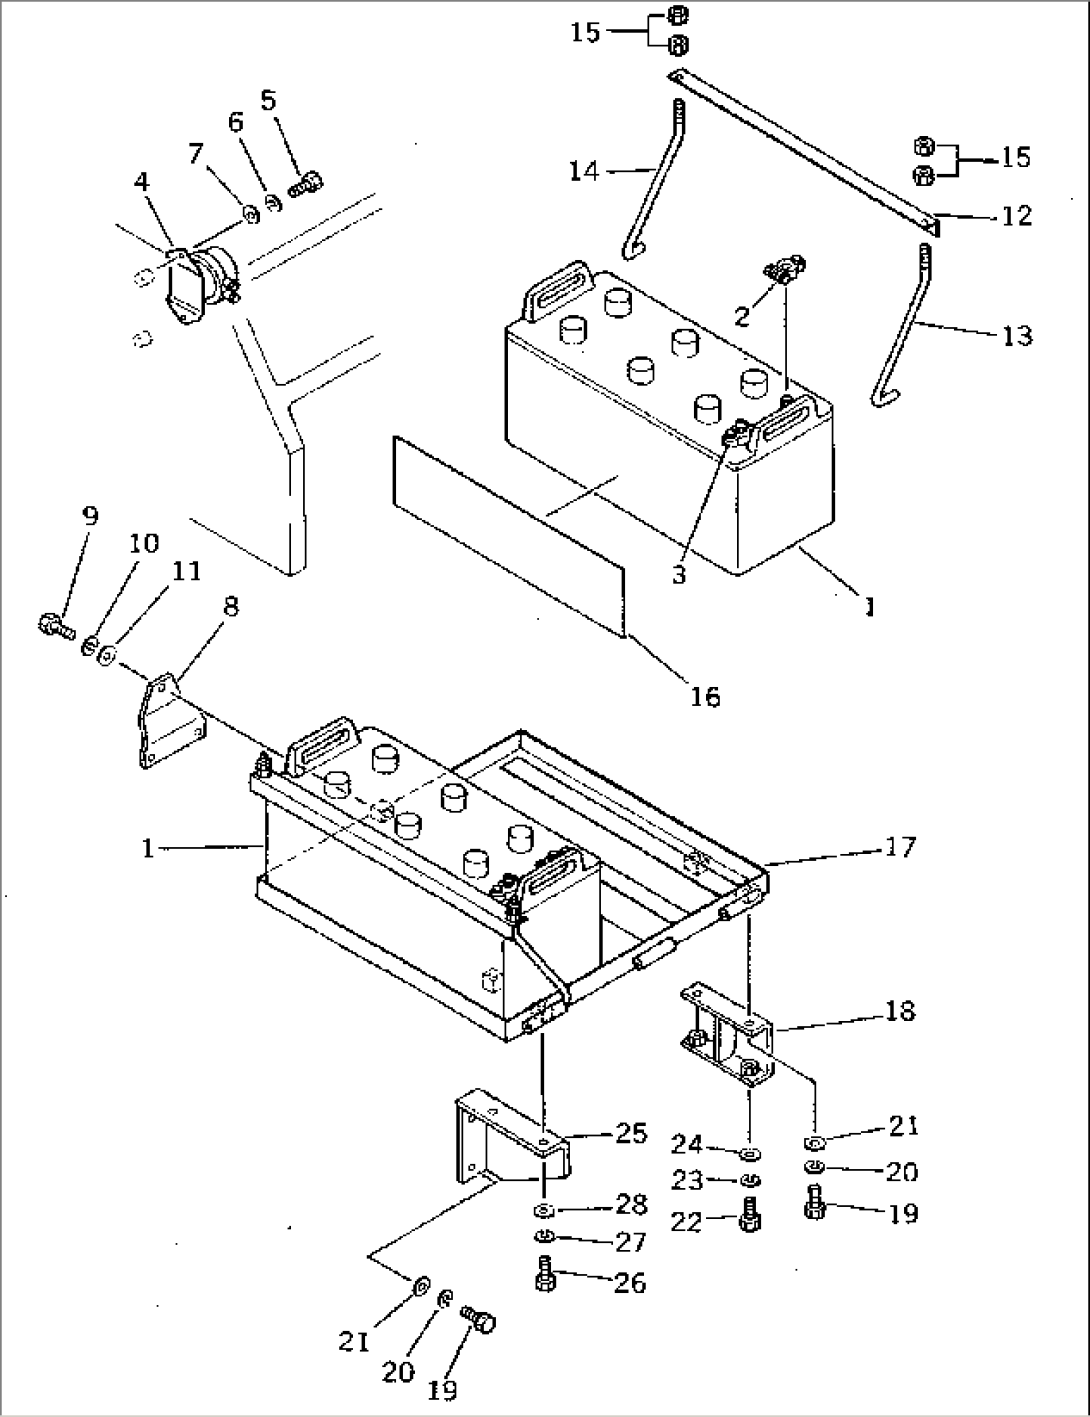 BATTERY AND SWITCH